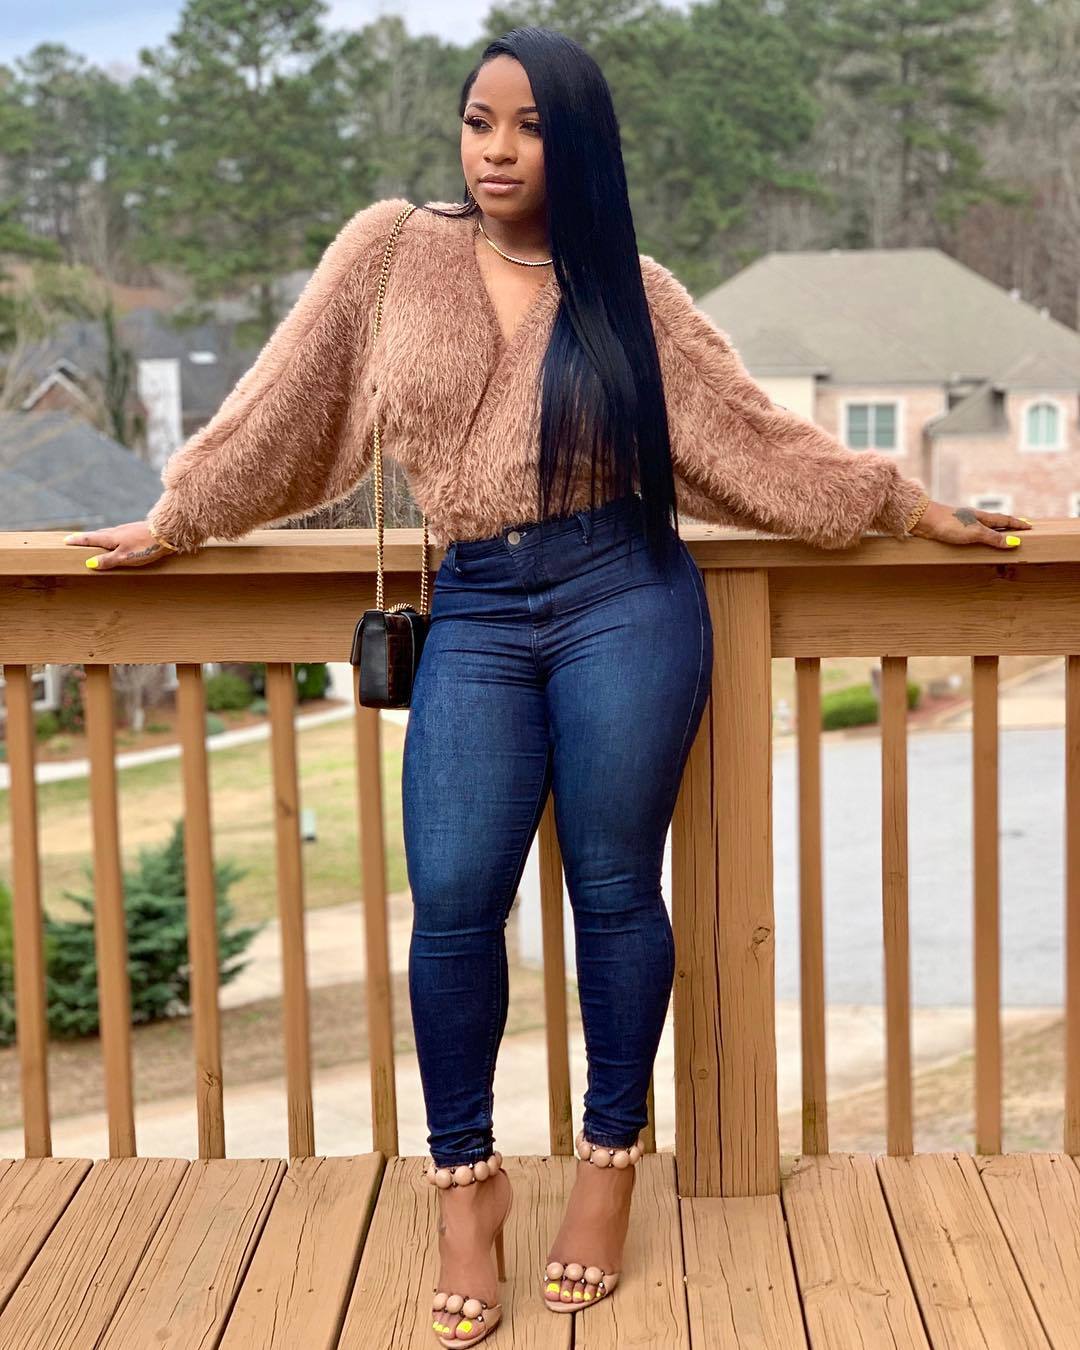 Toya Johnson Announces That Breonna Taylor's Law Finally Passed!